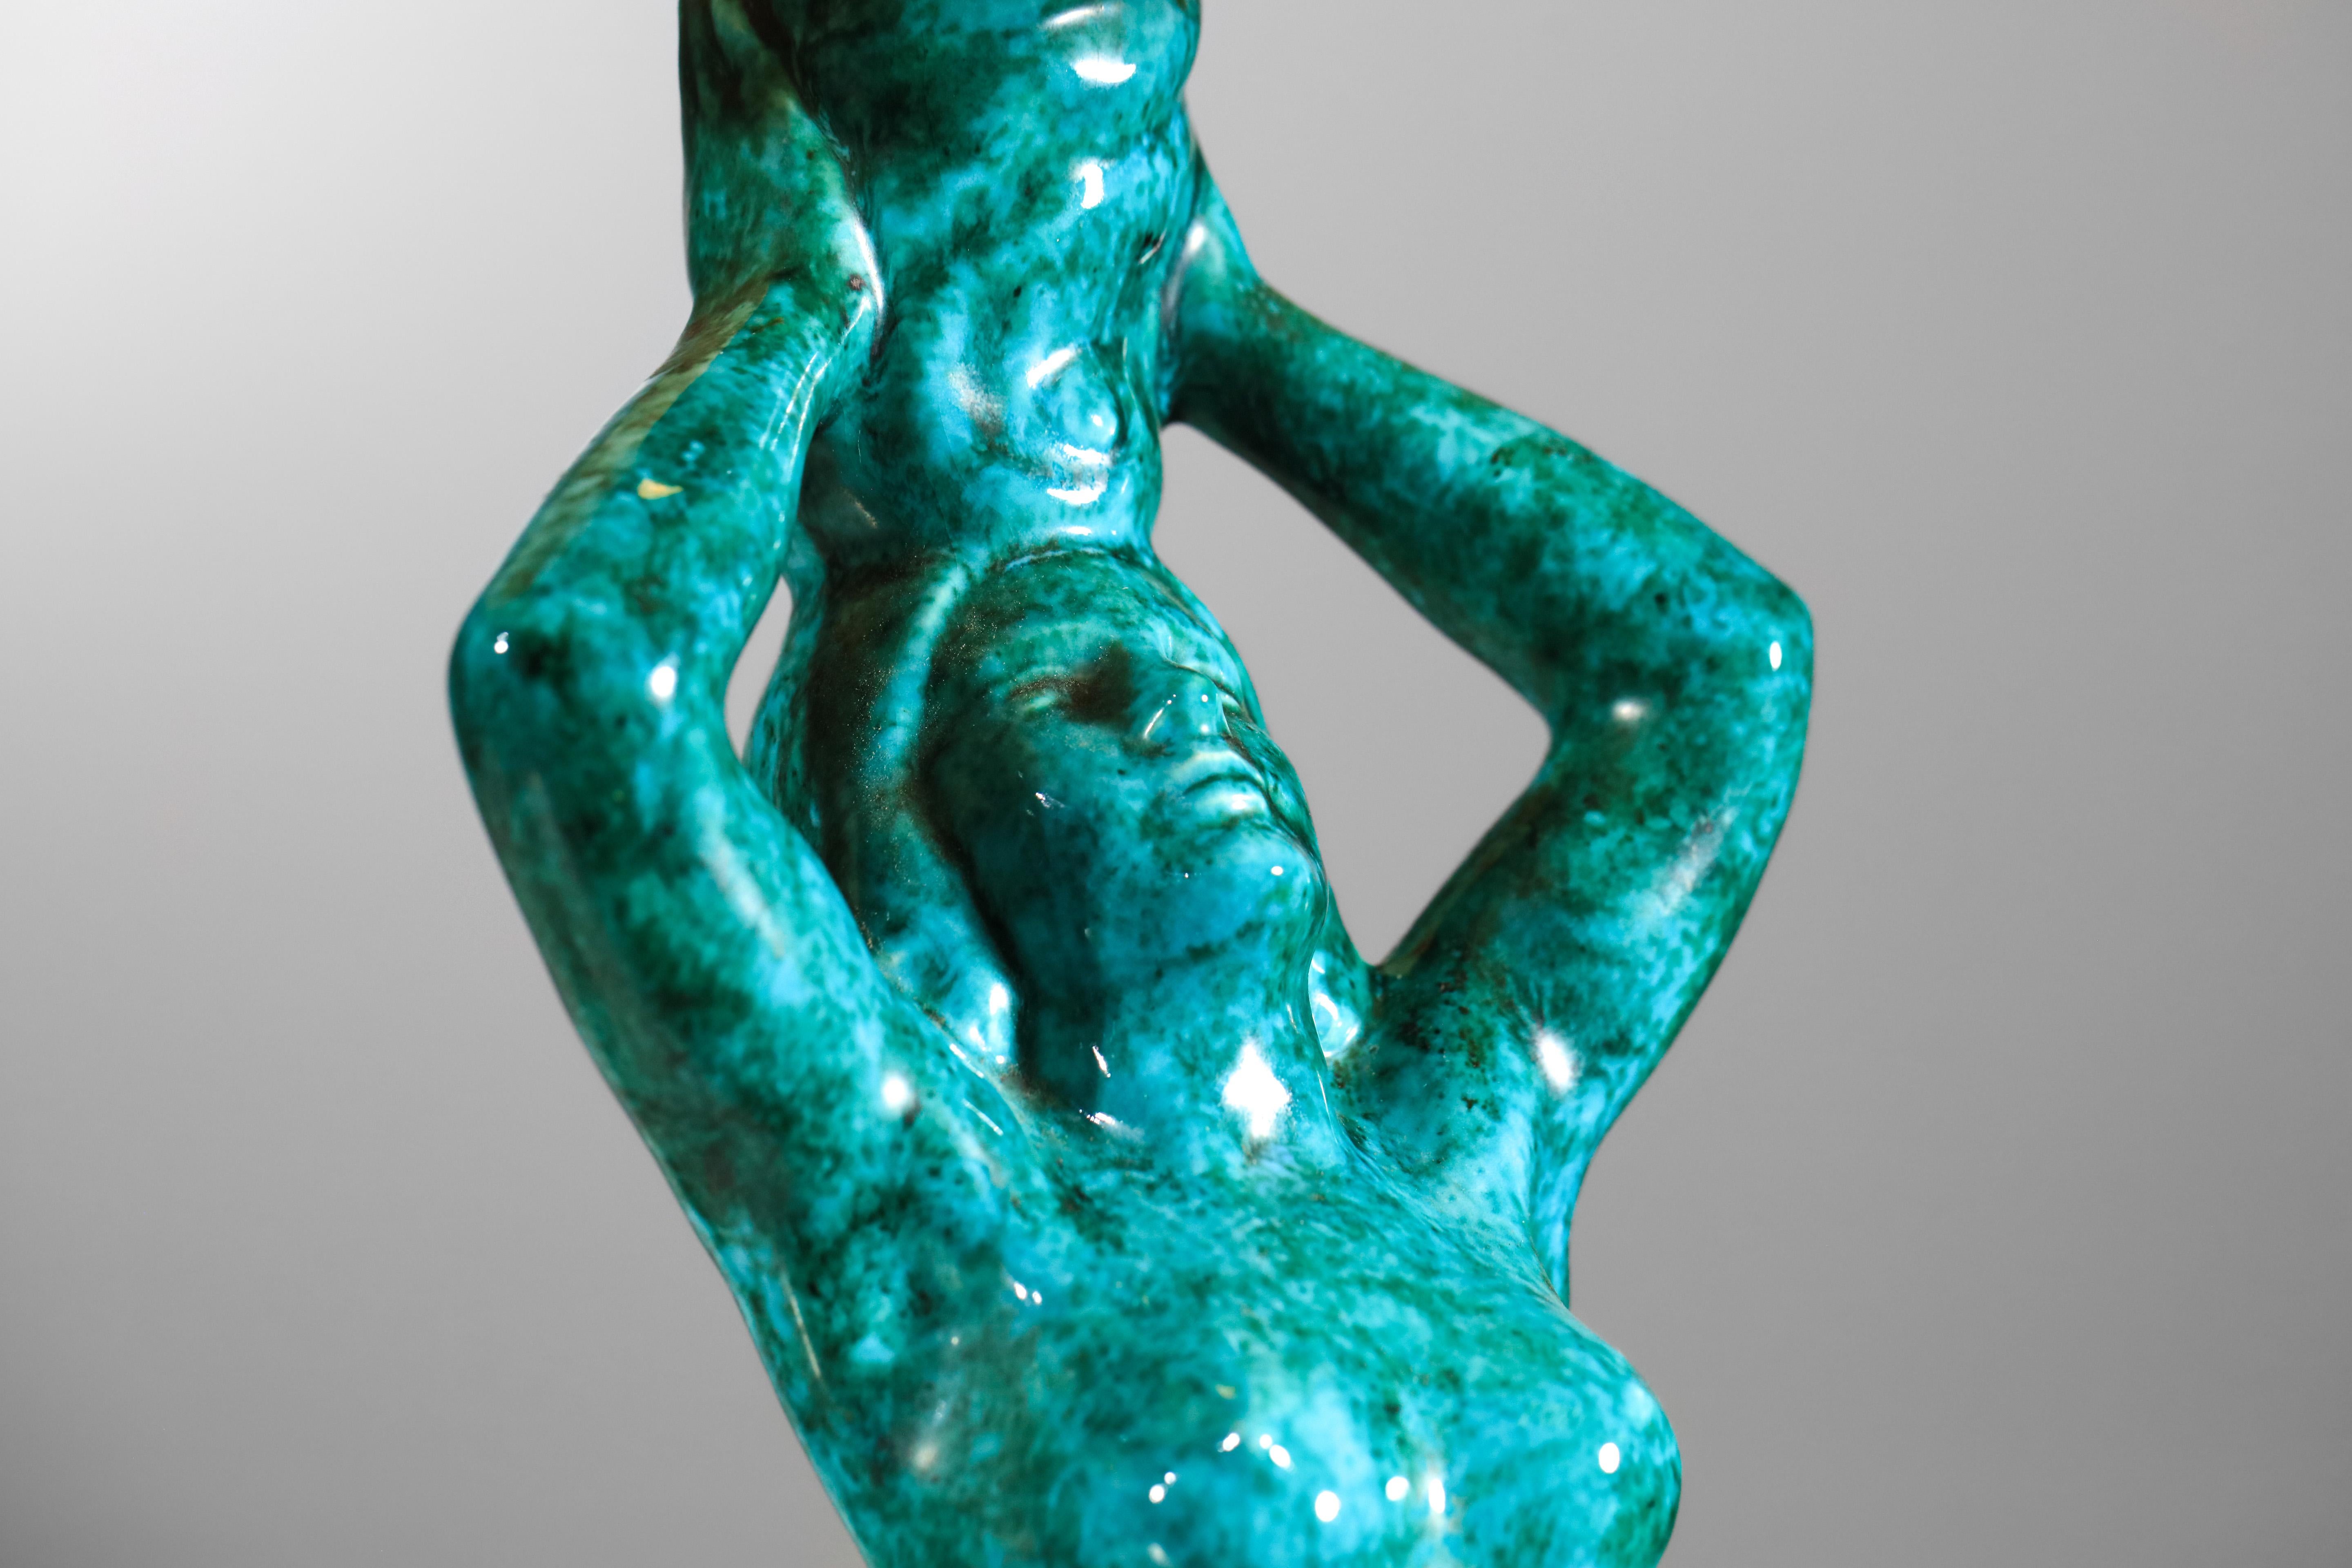 Mid-20th Century French Pair of mermaid lamps signed SRD Paris green-blue 50's ceramic